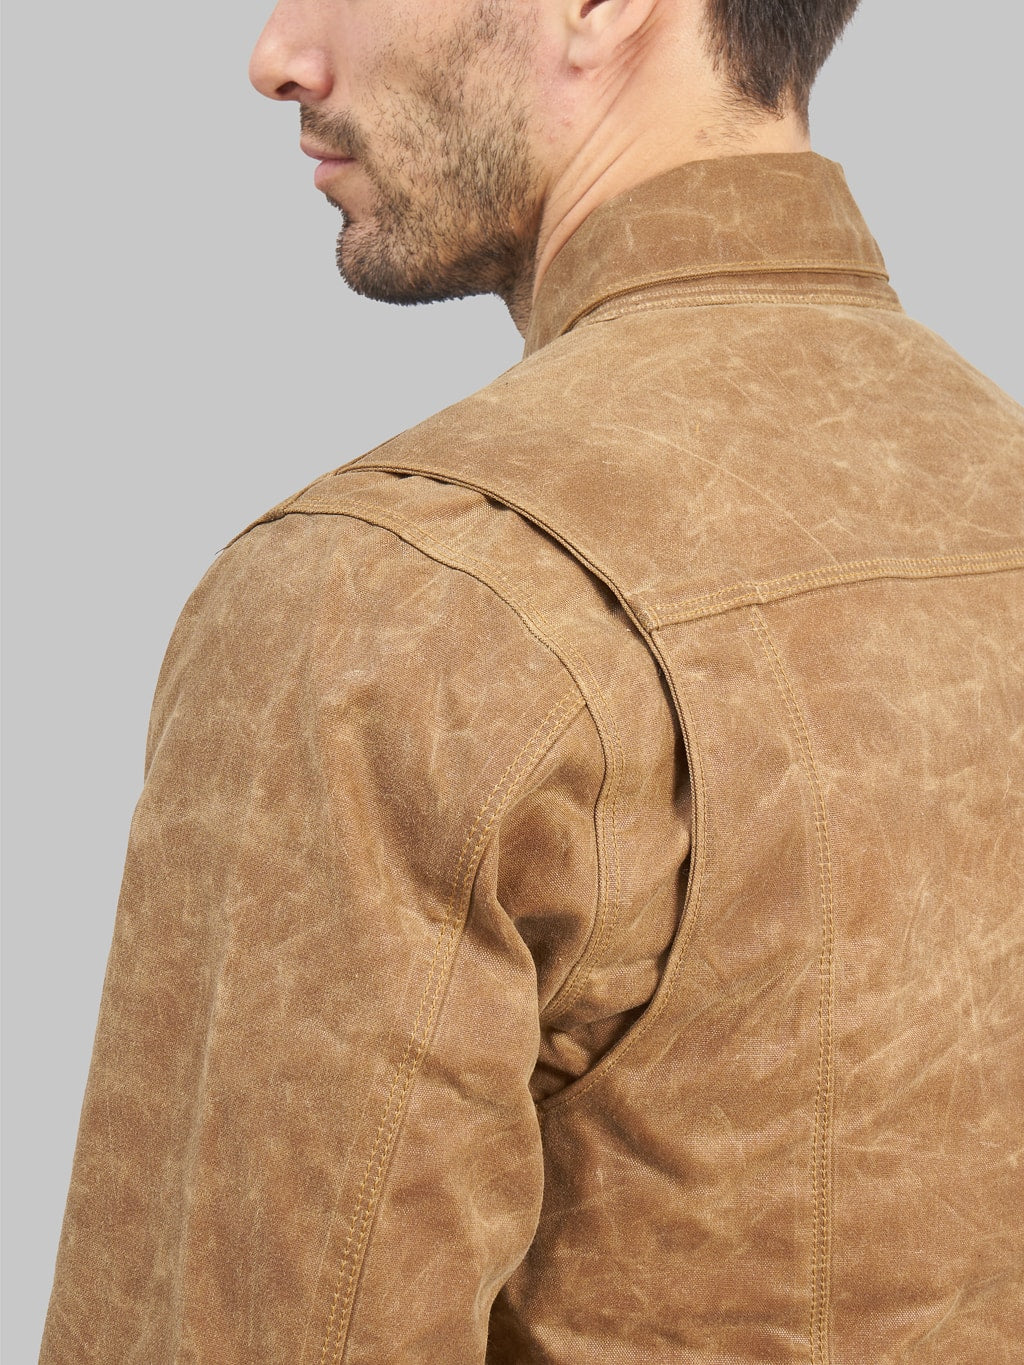 Freenote Cloth Riders Jacket Waxed Canvas Rust sleeve details